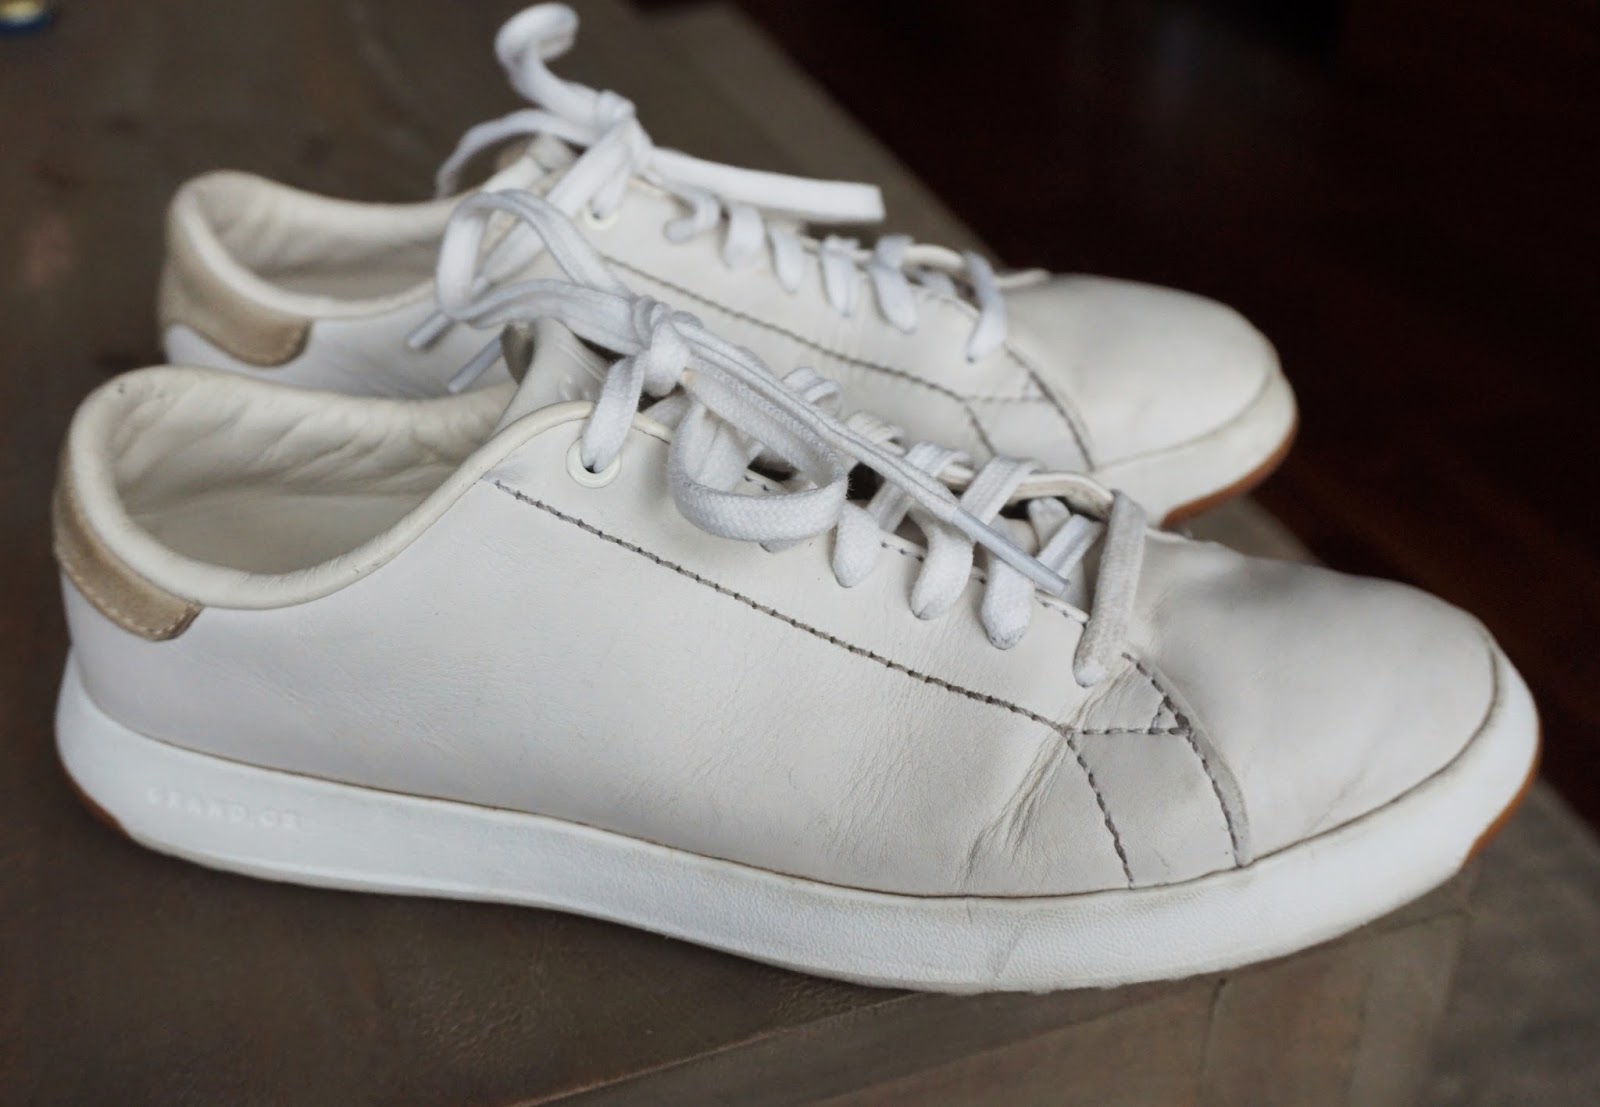 How to Clean Cole Haan Grand Os Shoes?